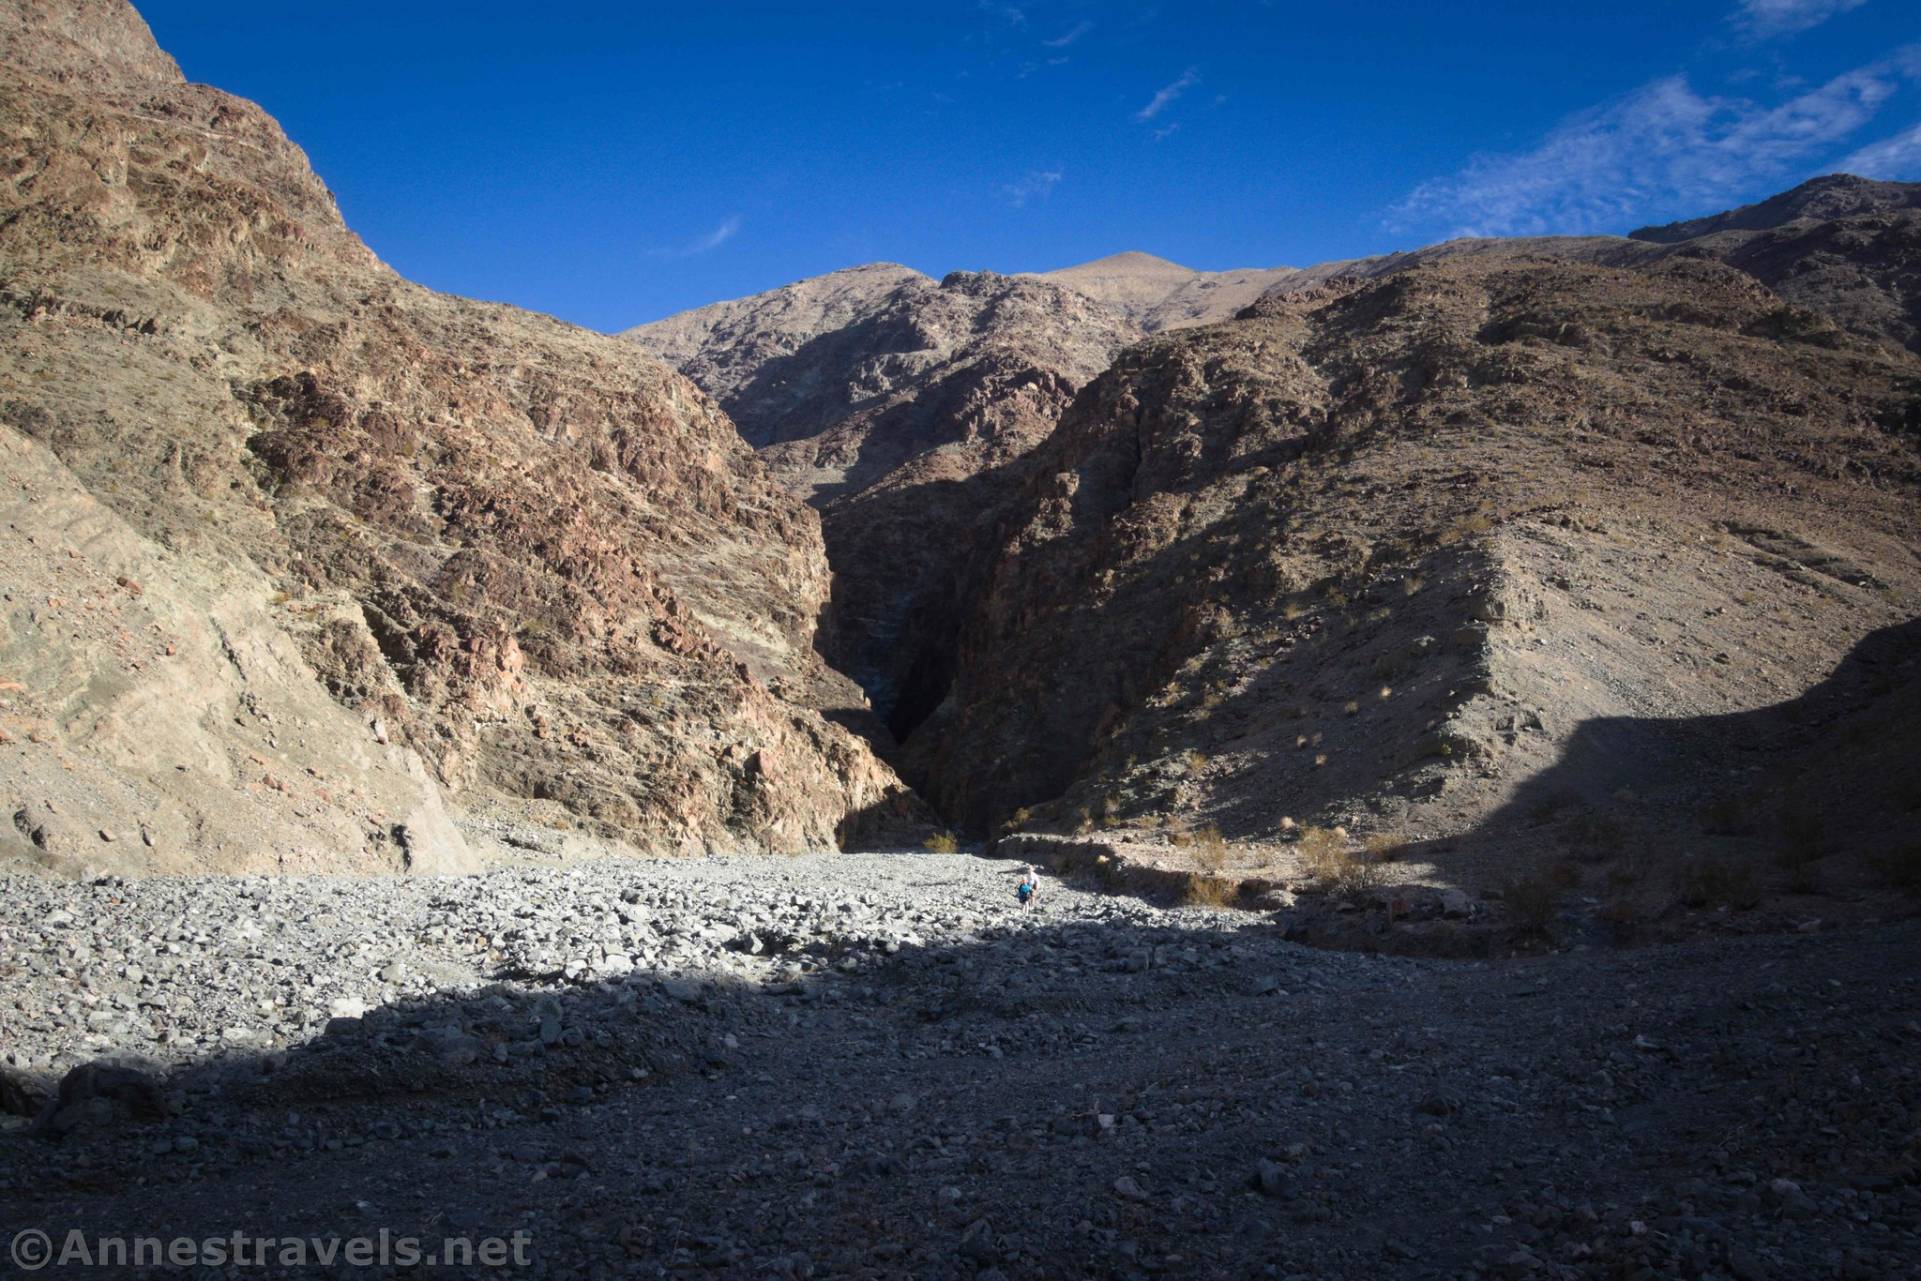 Entering the narrows of Willow Canyon, Death Valley National Park, California